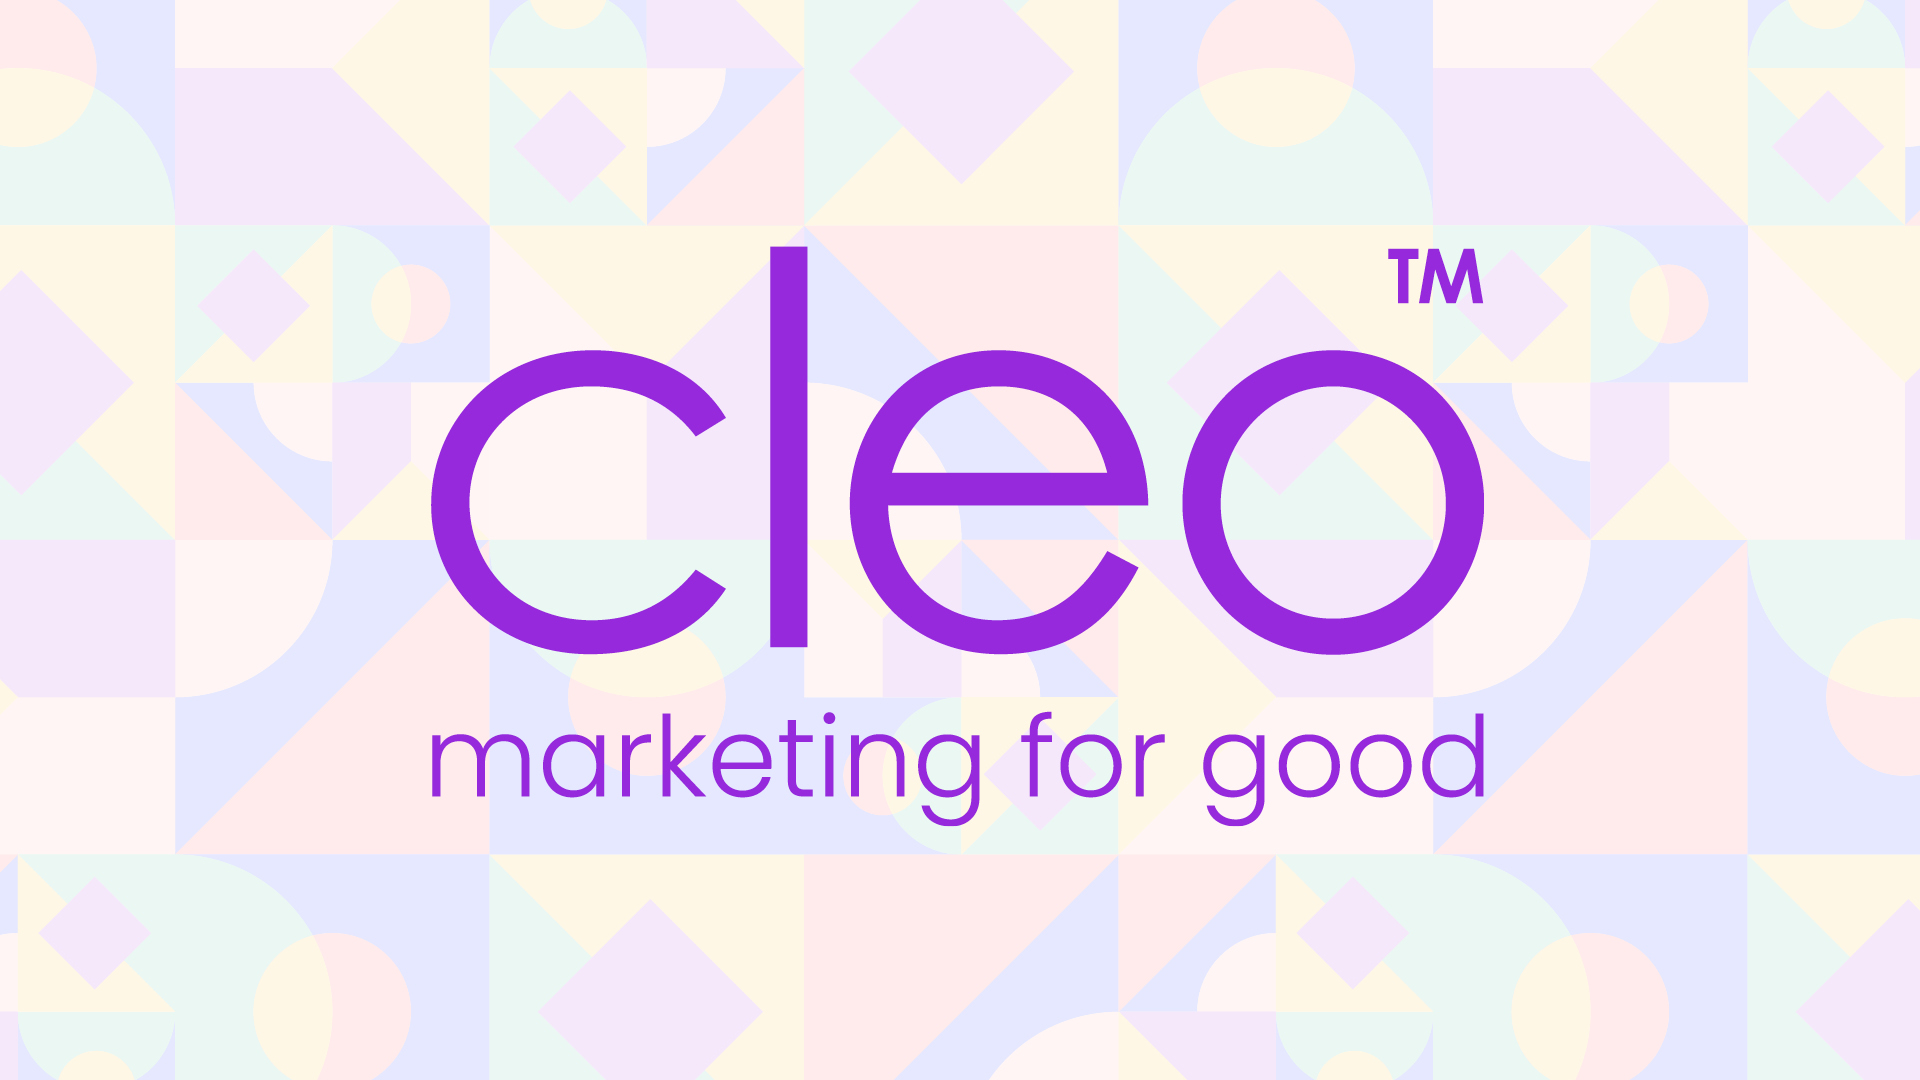 CLEO - marketing for good